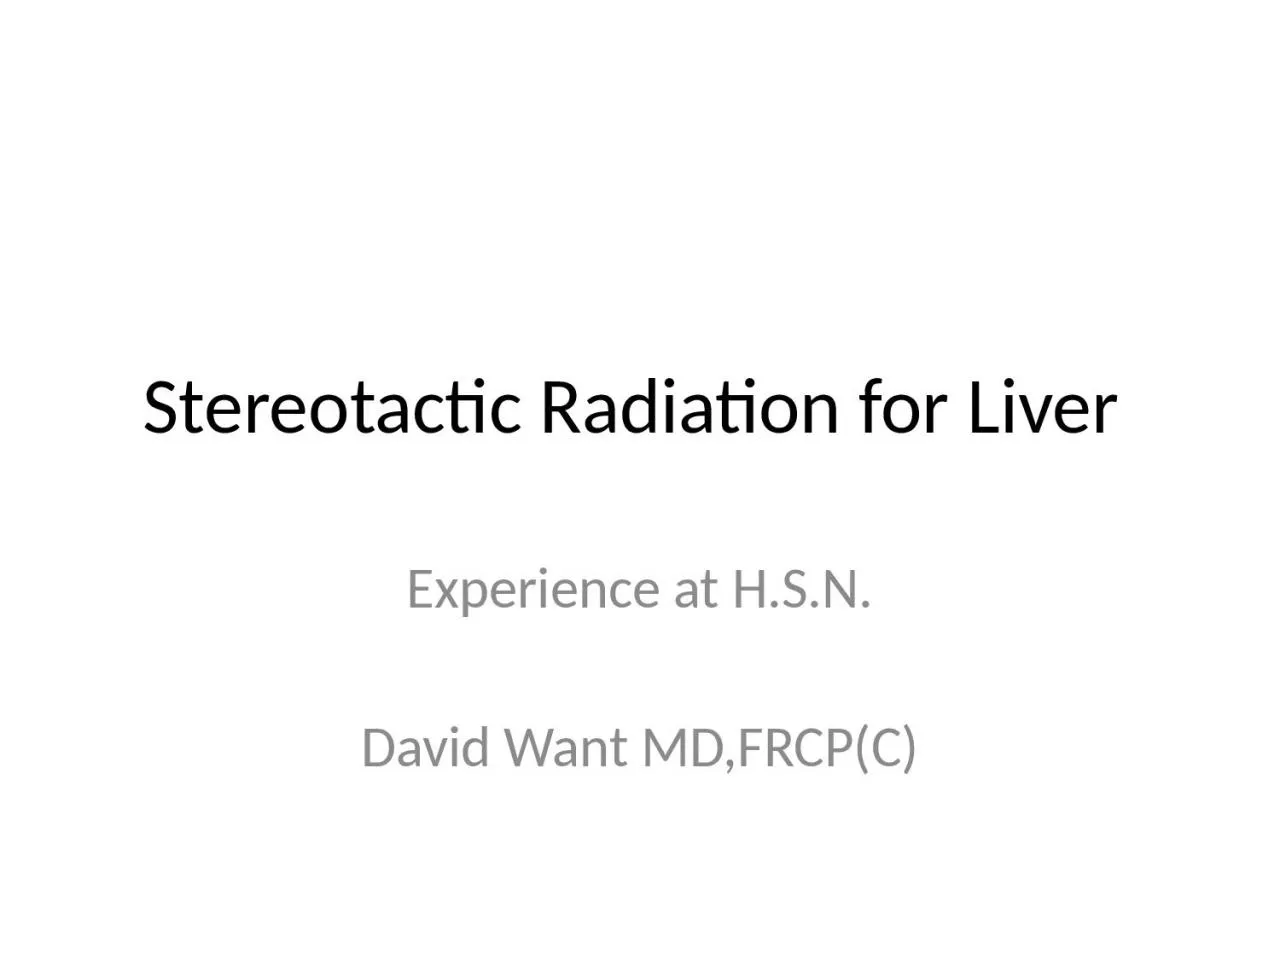 Stereotactic Radiation for Liver